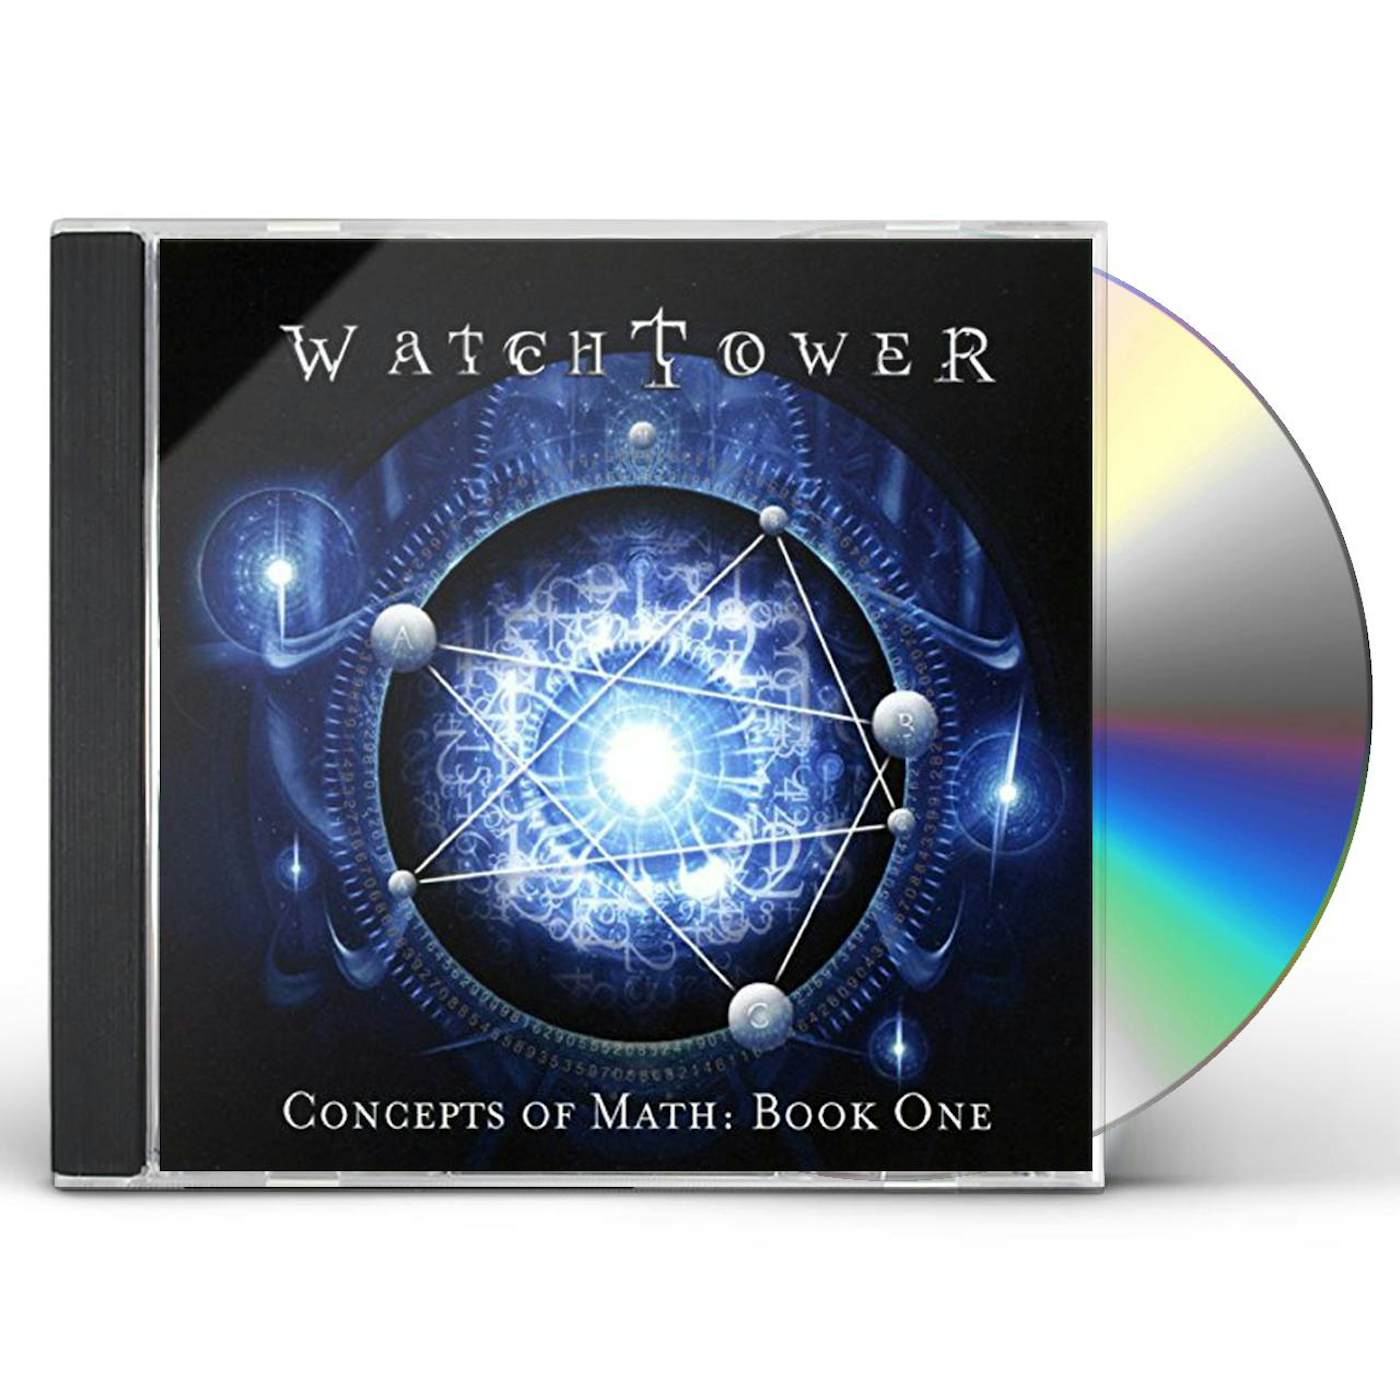 Watchtower CONCEPTS OF MATH: BOOK ONE CD